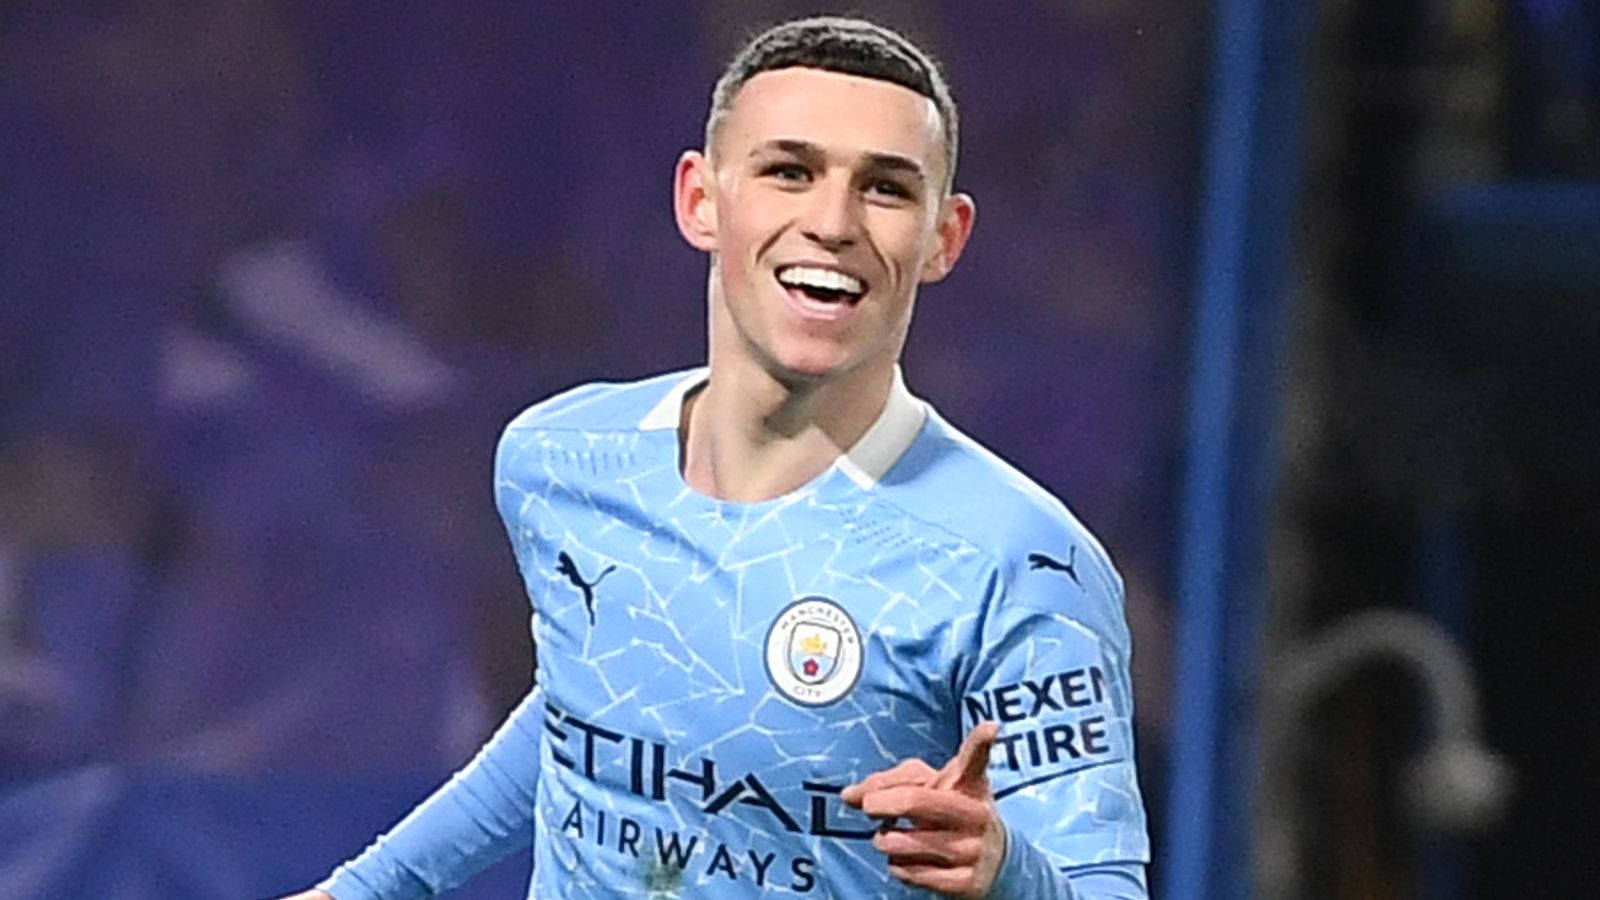 (since This Is A Short And Simple Sentence, There Is Not Much Context Needed For A Computer/mobile Wallpaper. However, It Is Understood That The Sentence Refers To An Image Of Phil Foden Smiling That Could Be Used As A Wallpaper.) Wallpaper